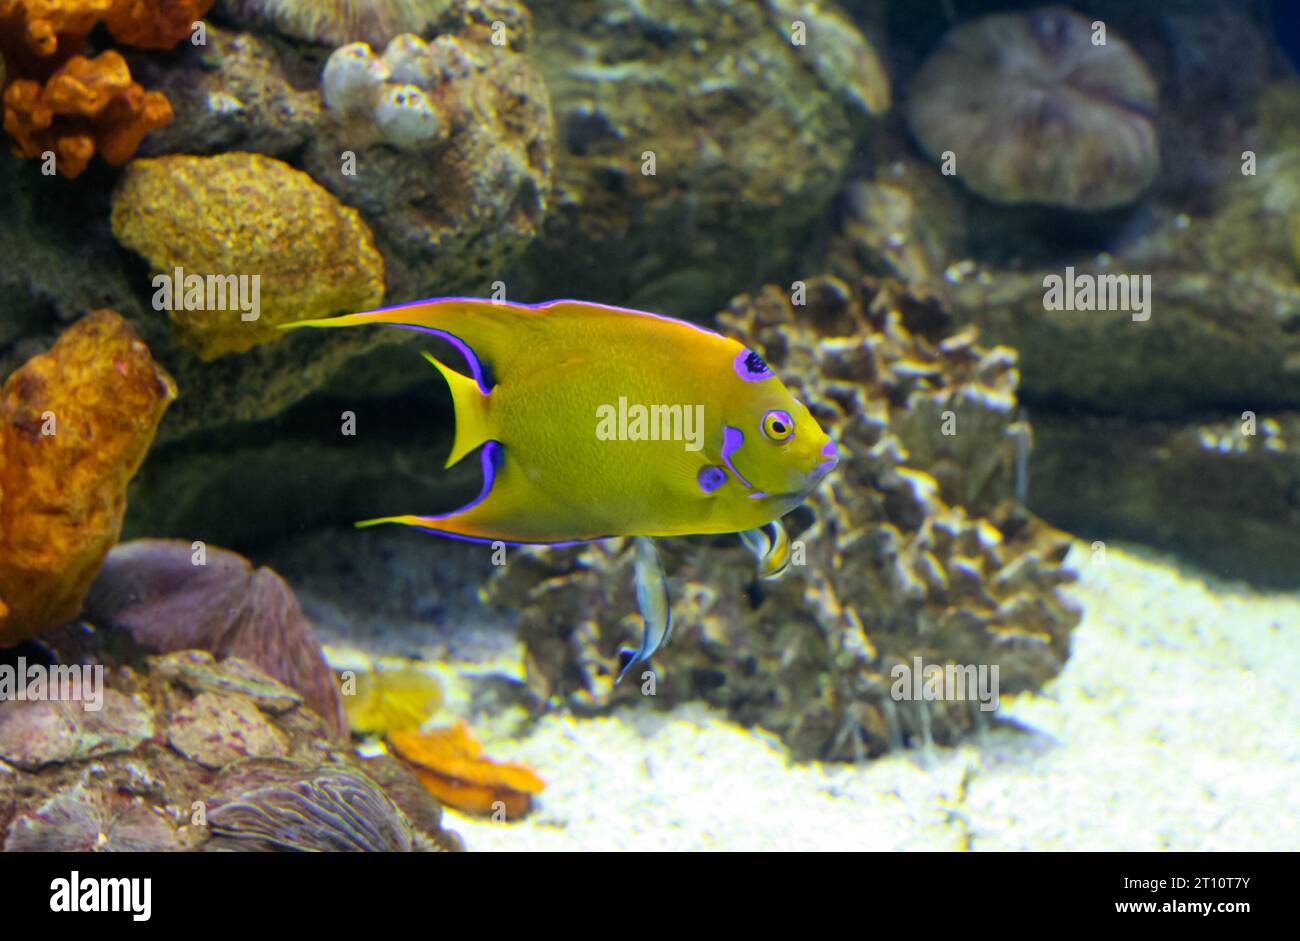 Queen angelfish or Holacanthus ciliaris. One specimen swiming close to sandy seabed Stock Photo